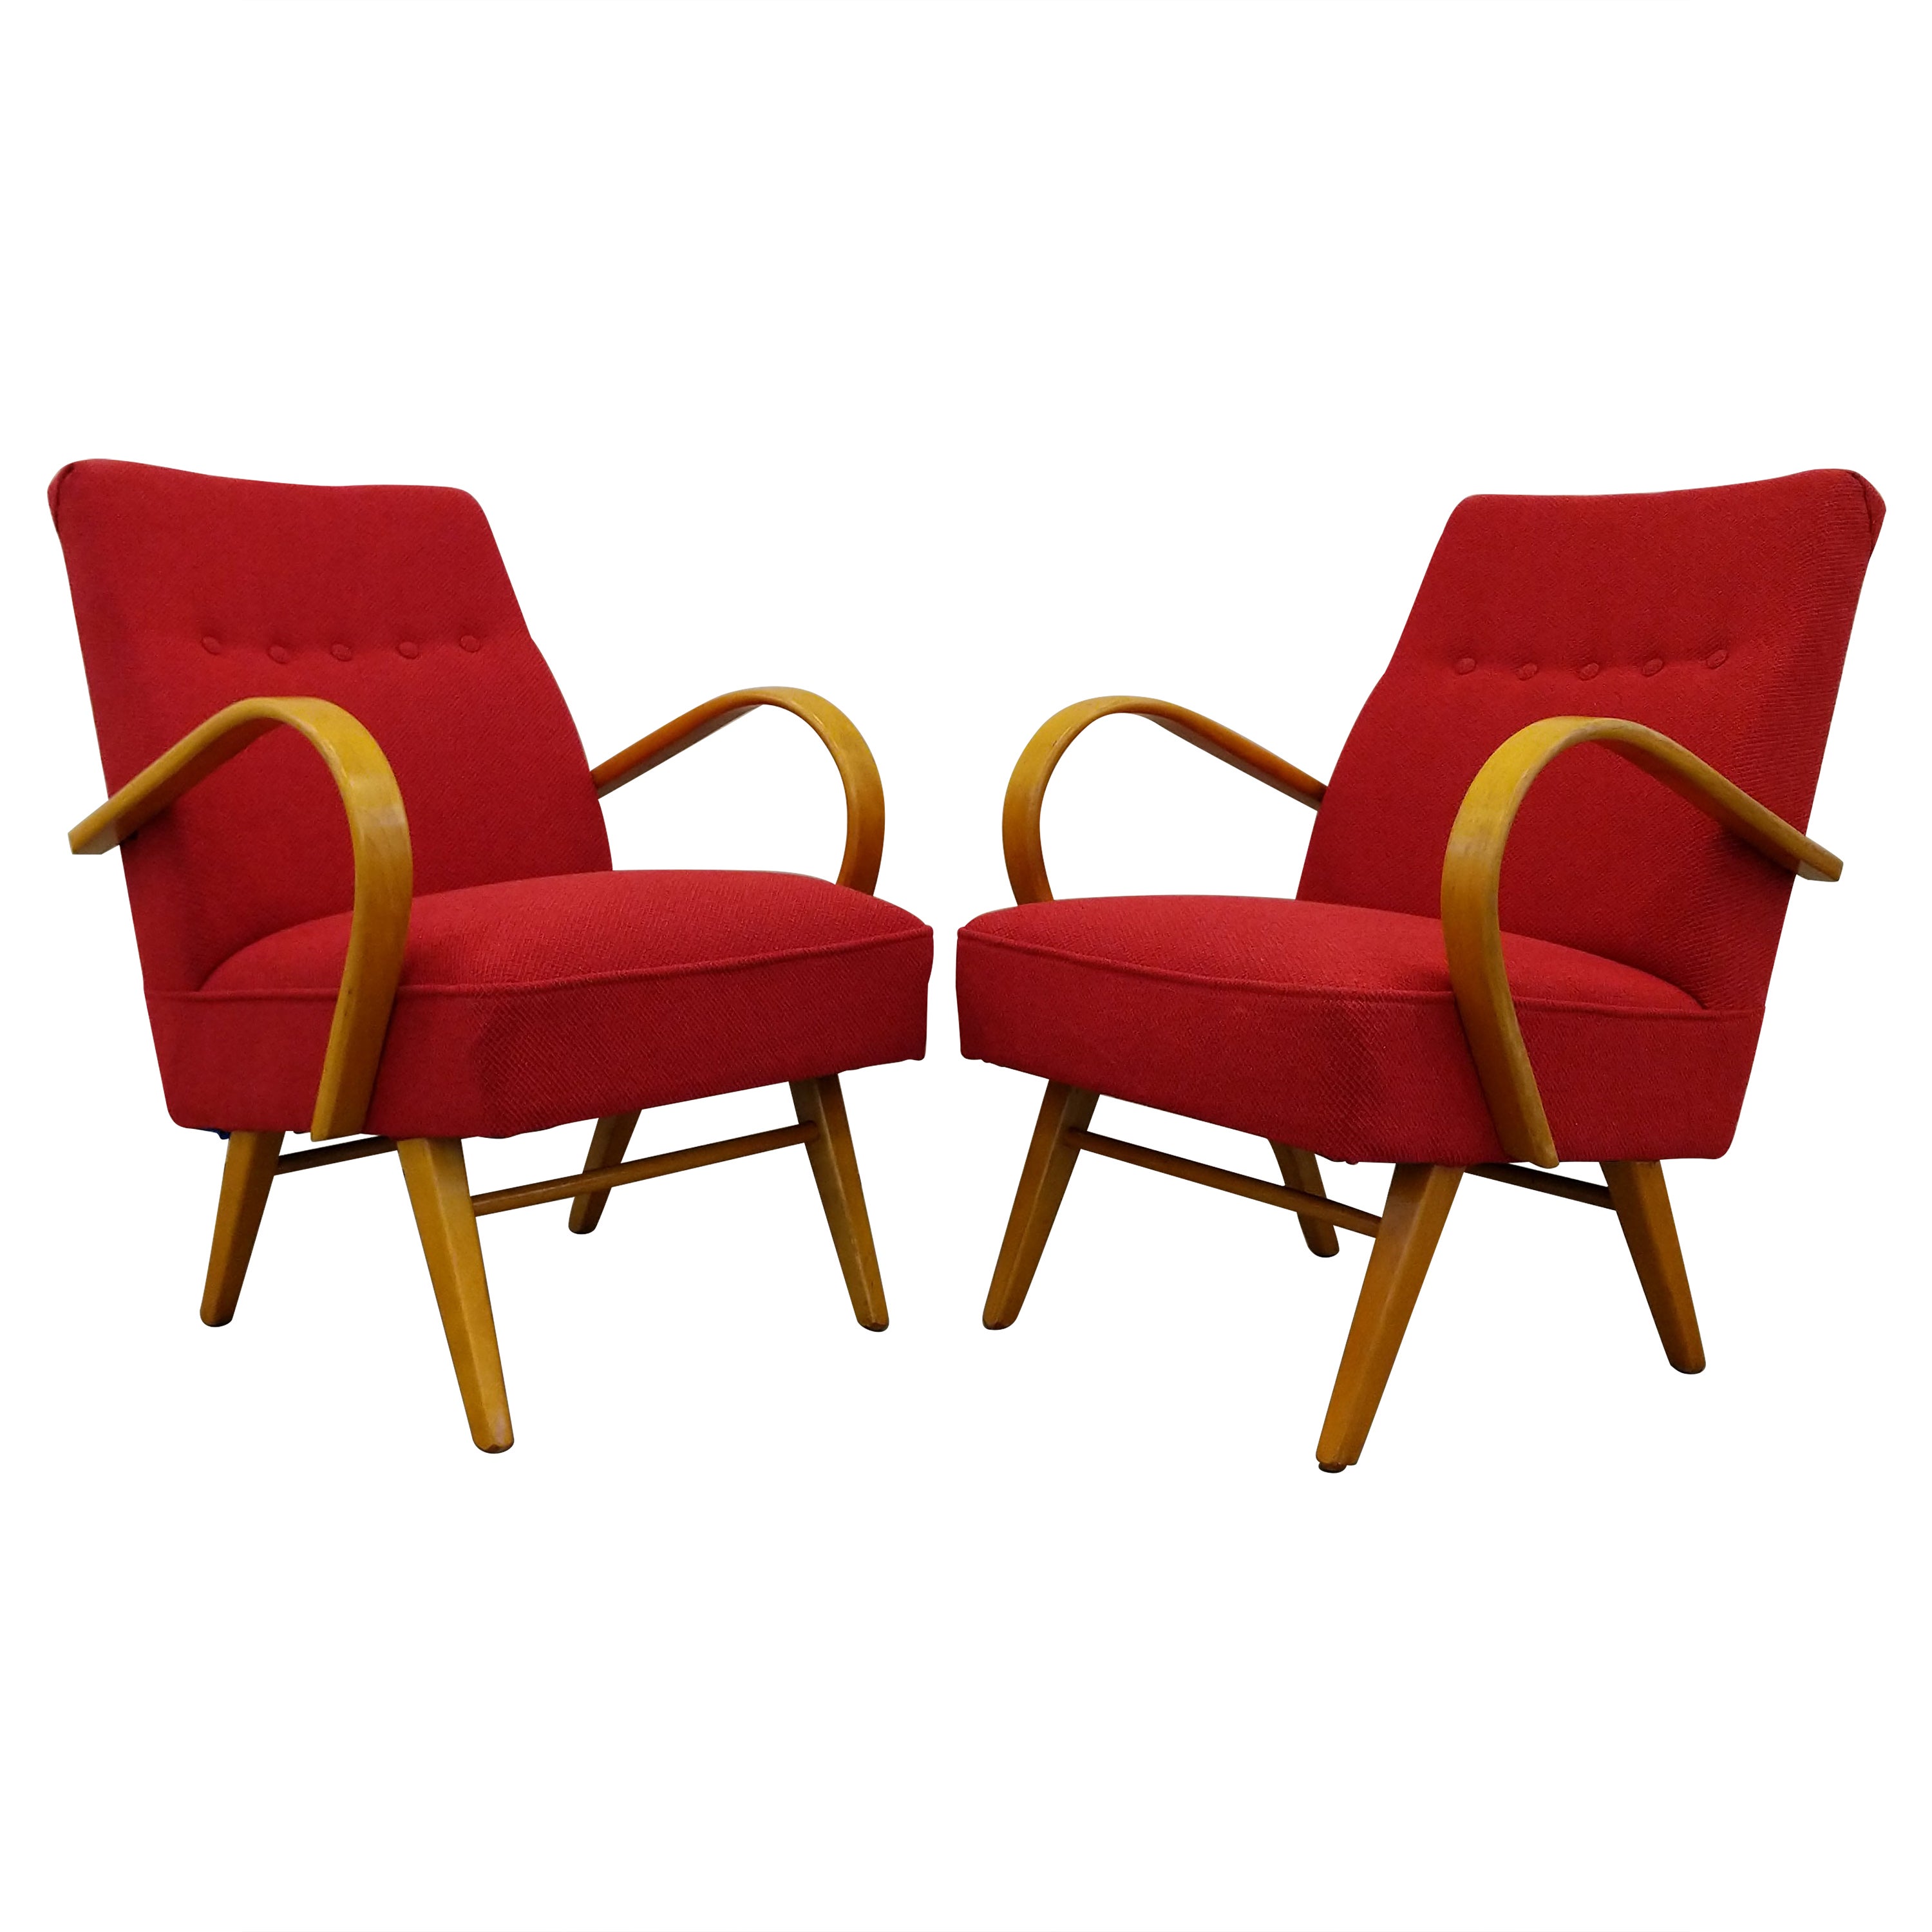 Pair of Vintage Czech Mid Century Modern Lounge Chairs For Sale